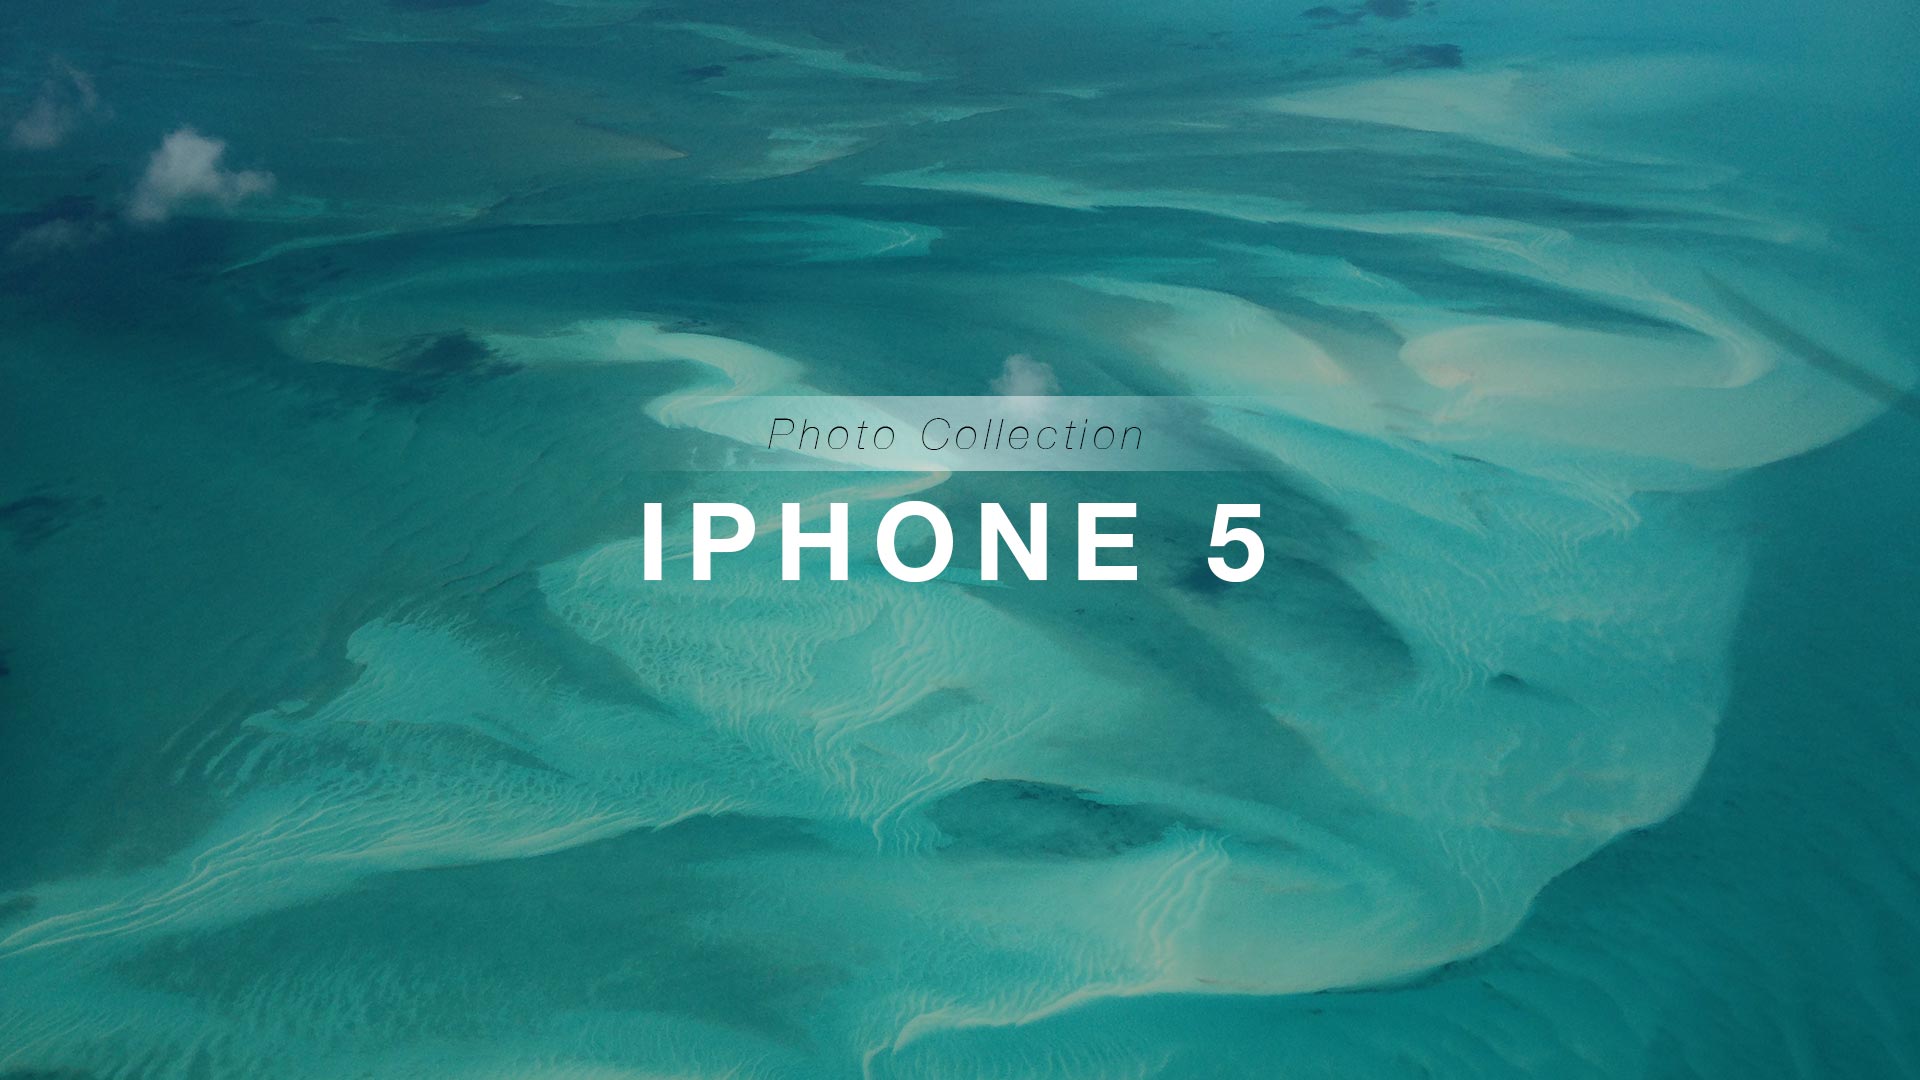 iPhone 5 – Photography